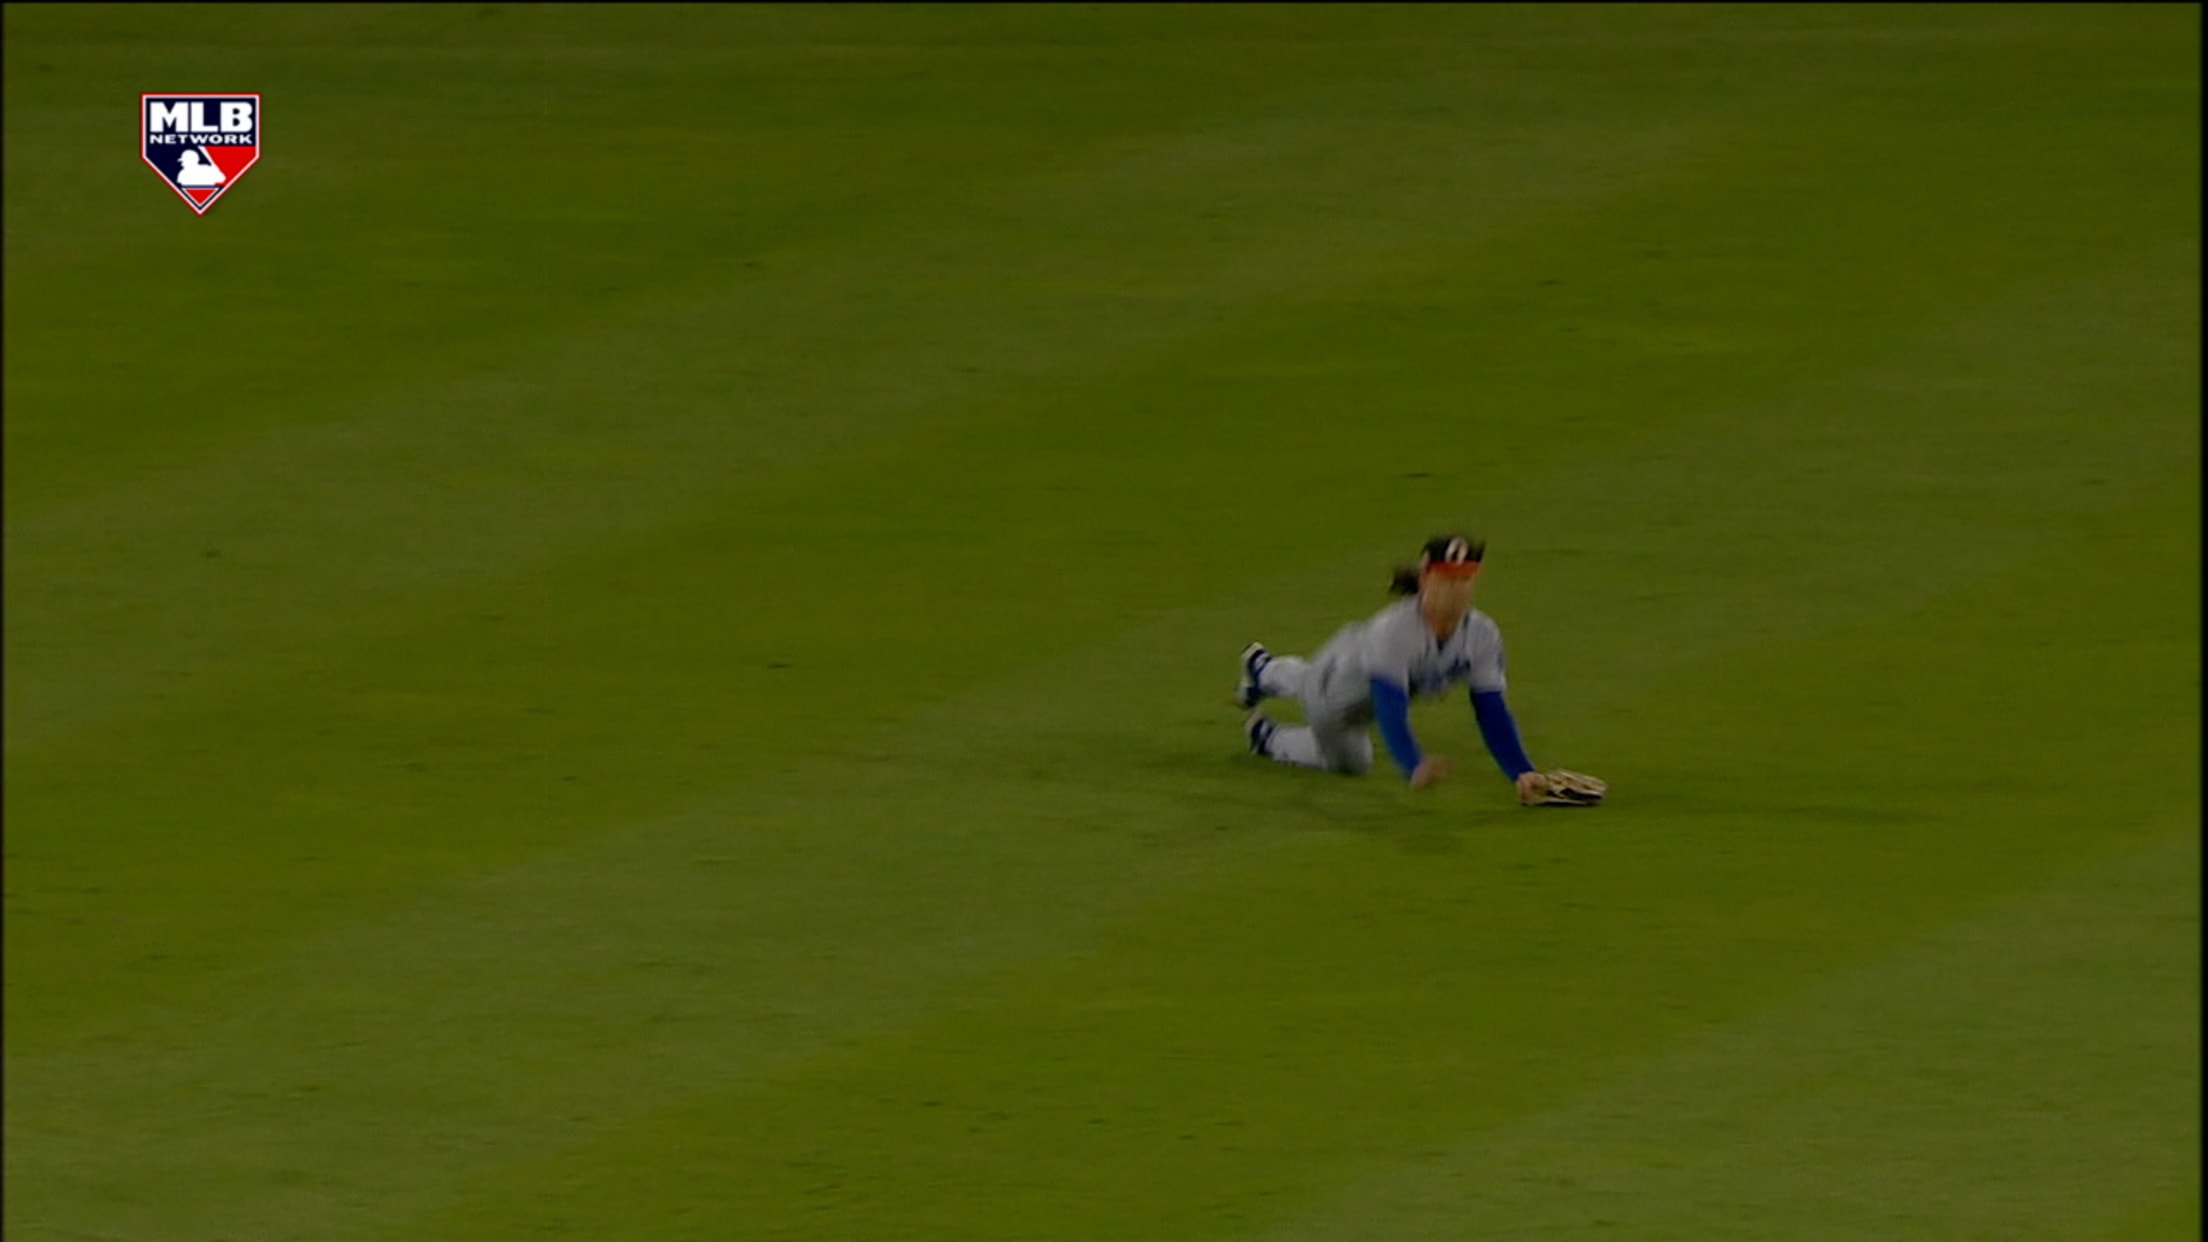 James Outman's diving grab